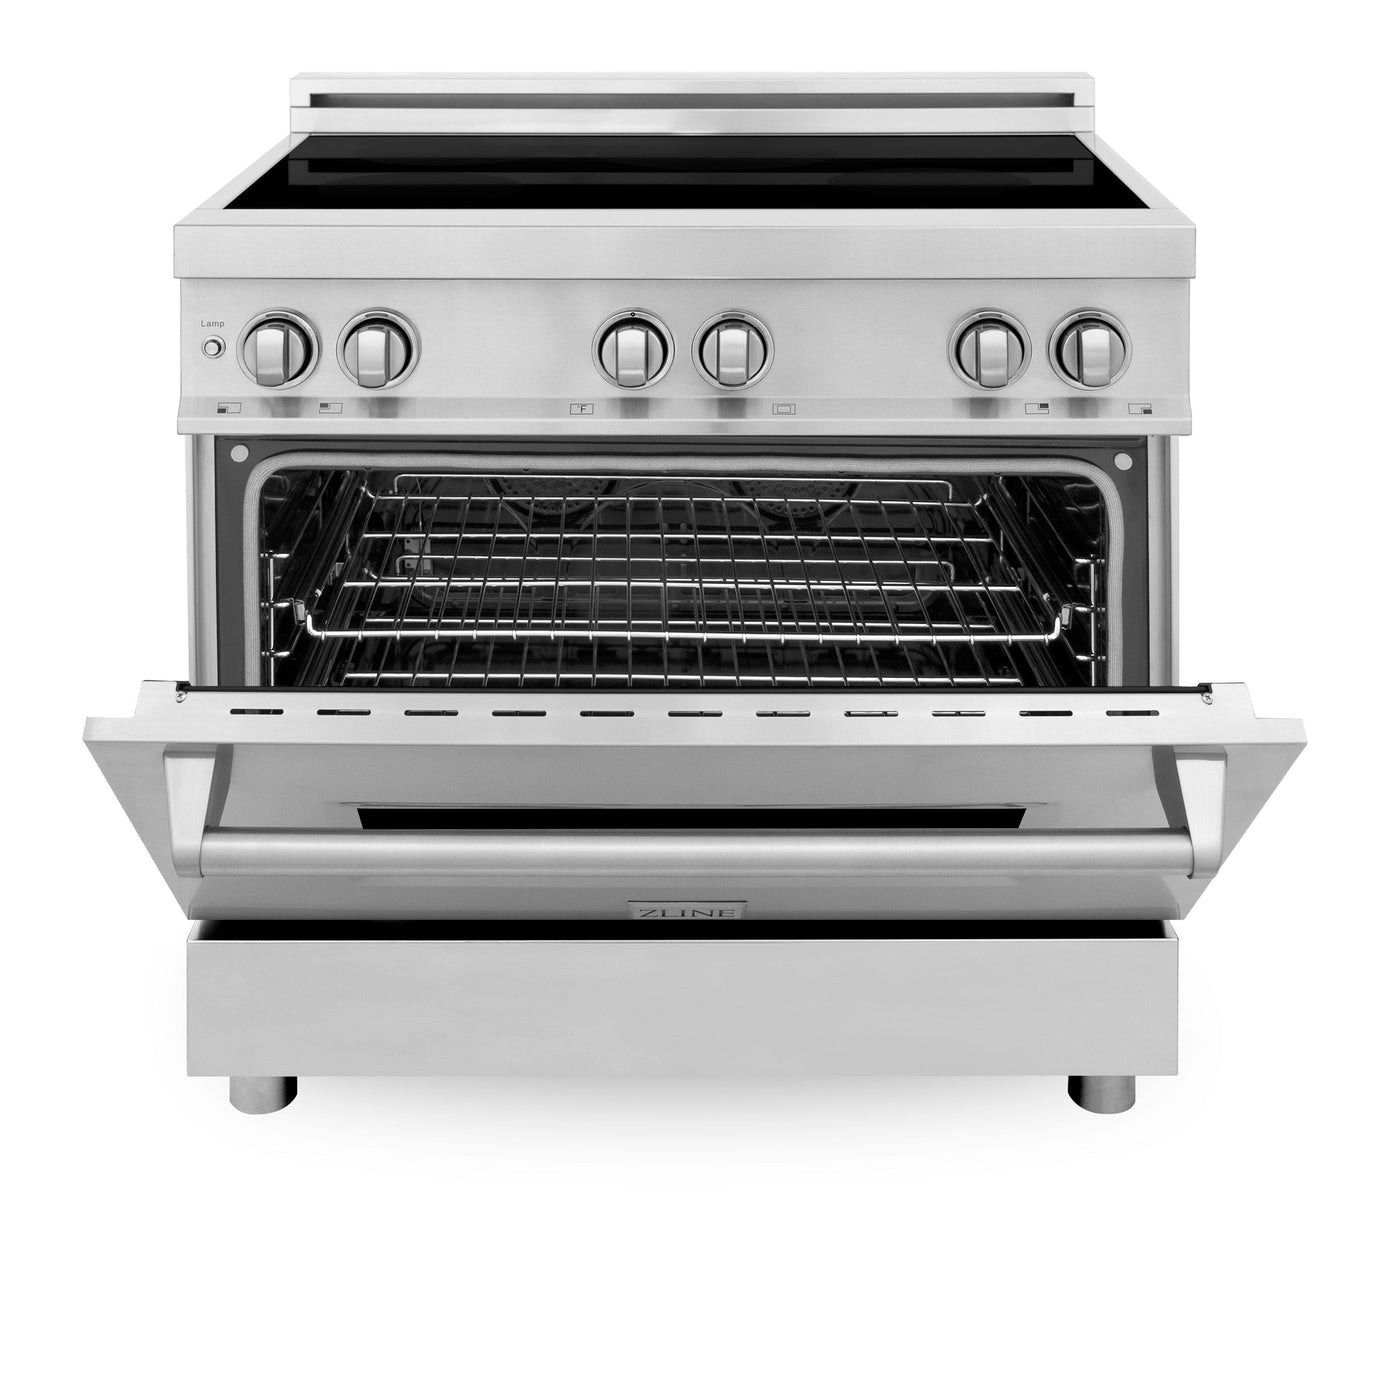 ZLINE 36 Inch 4.6 cu. ft. Induction Range with a 4 Element Stove and Electric Oven in Stainless Steel, RAIND-36